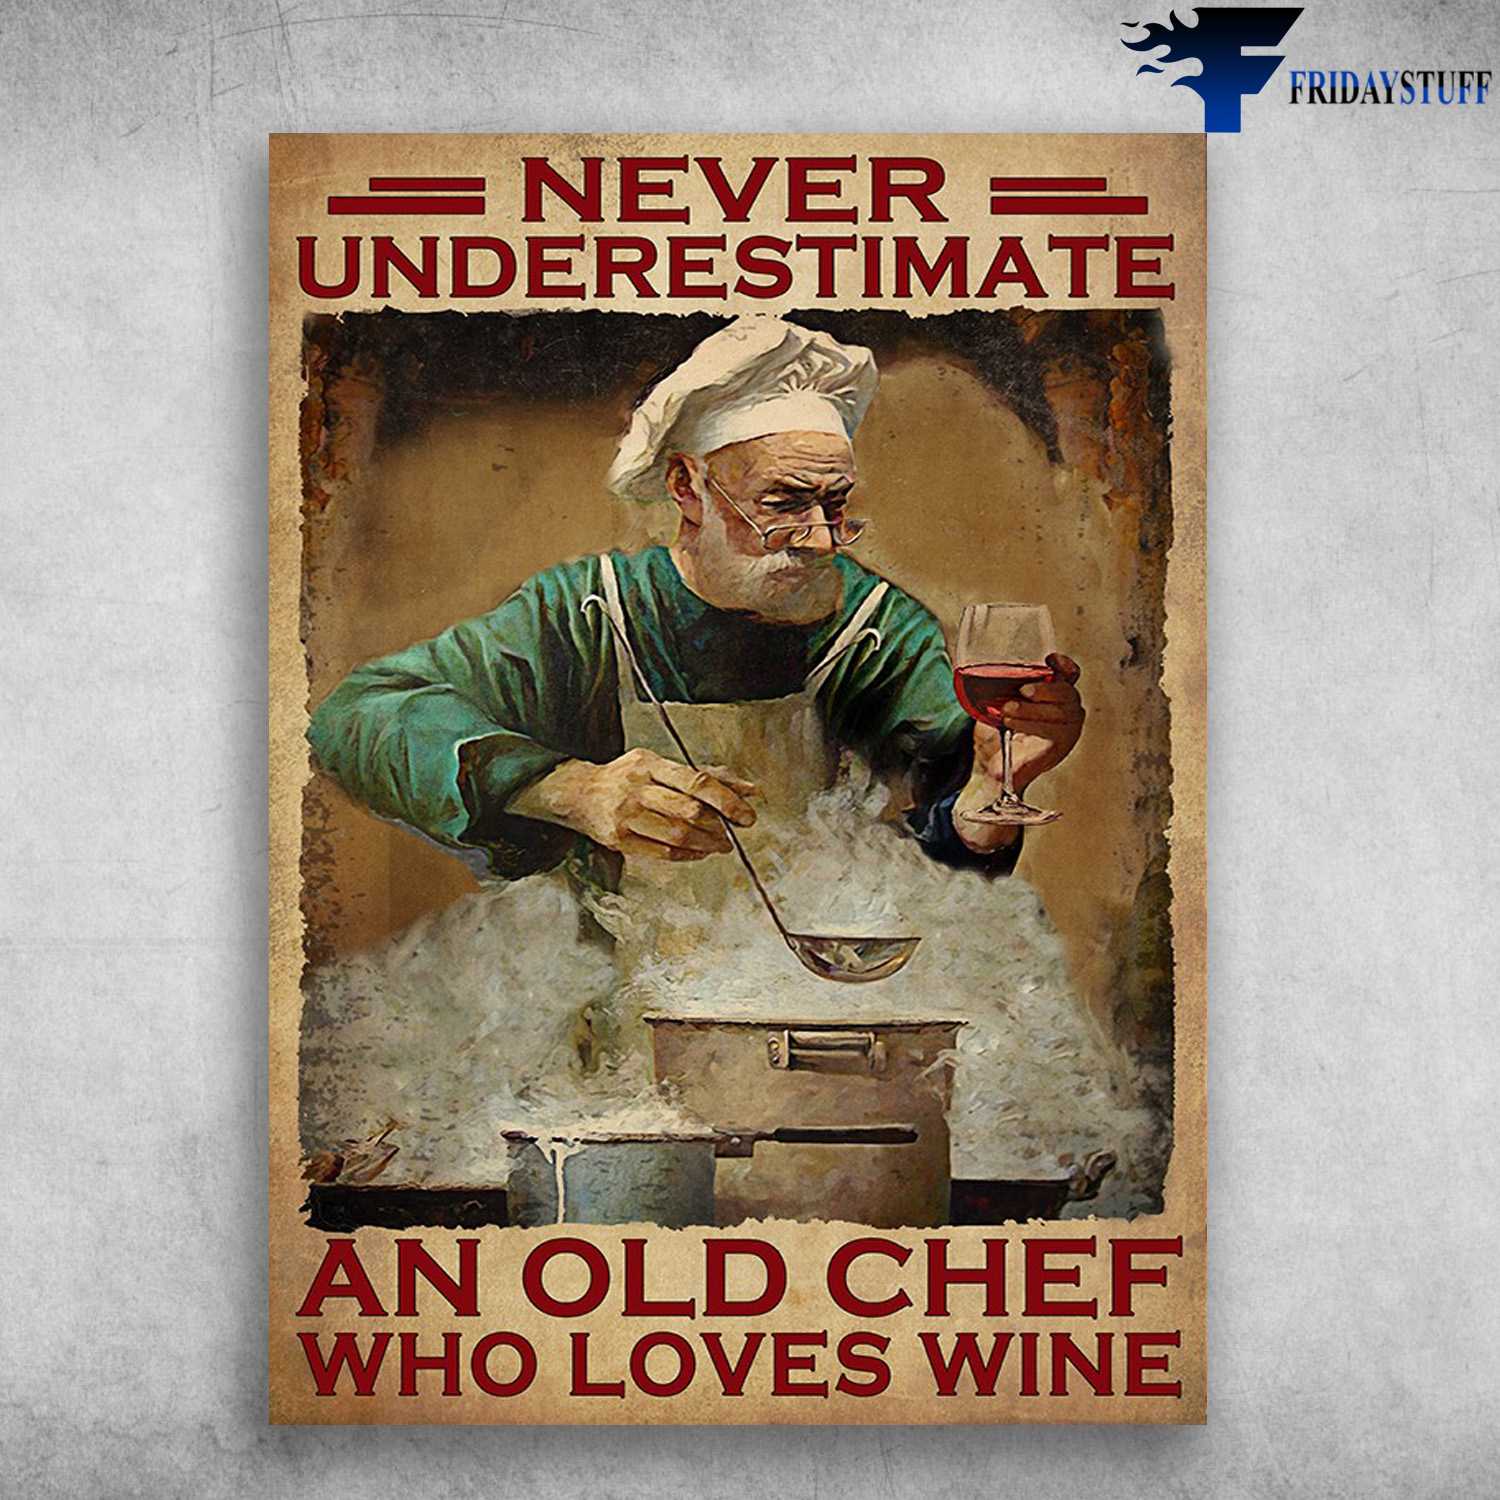 Old Chef Loves Wine - Never Underestimate An Old Chef, Who Loves Wine